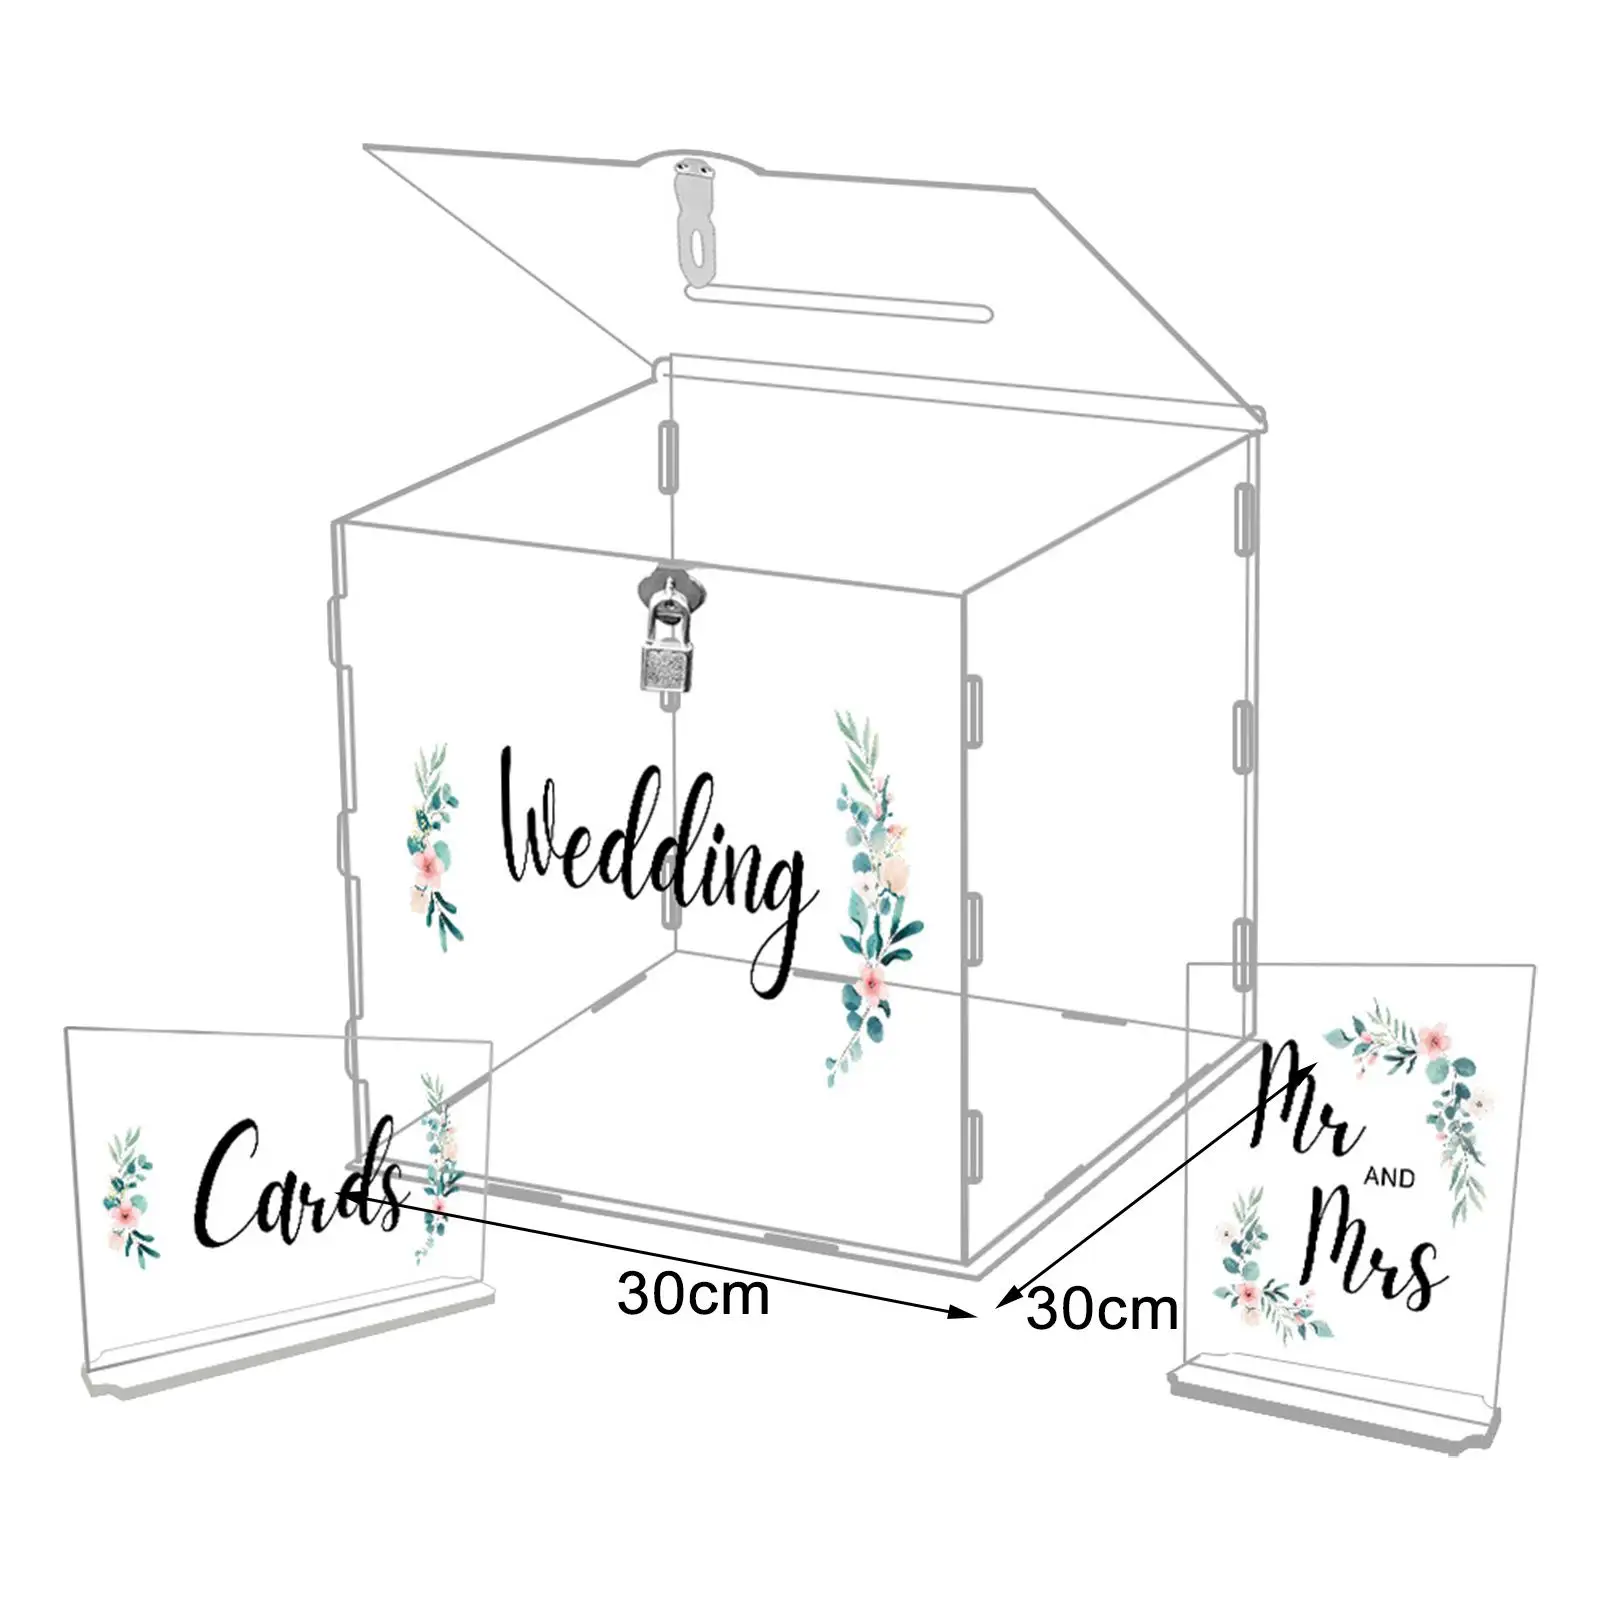 Acrylic wedding cards Box Elegant Storage Box Clear Guest Gift Card Box Decorative Letter Envelope Box for Anniversary Birthday